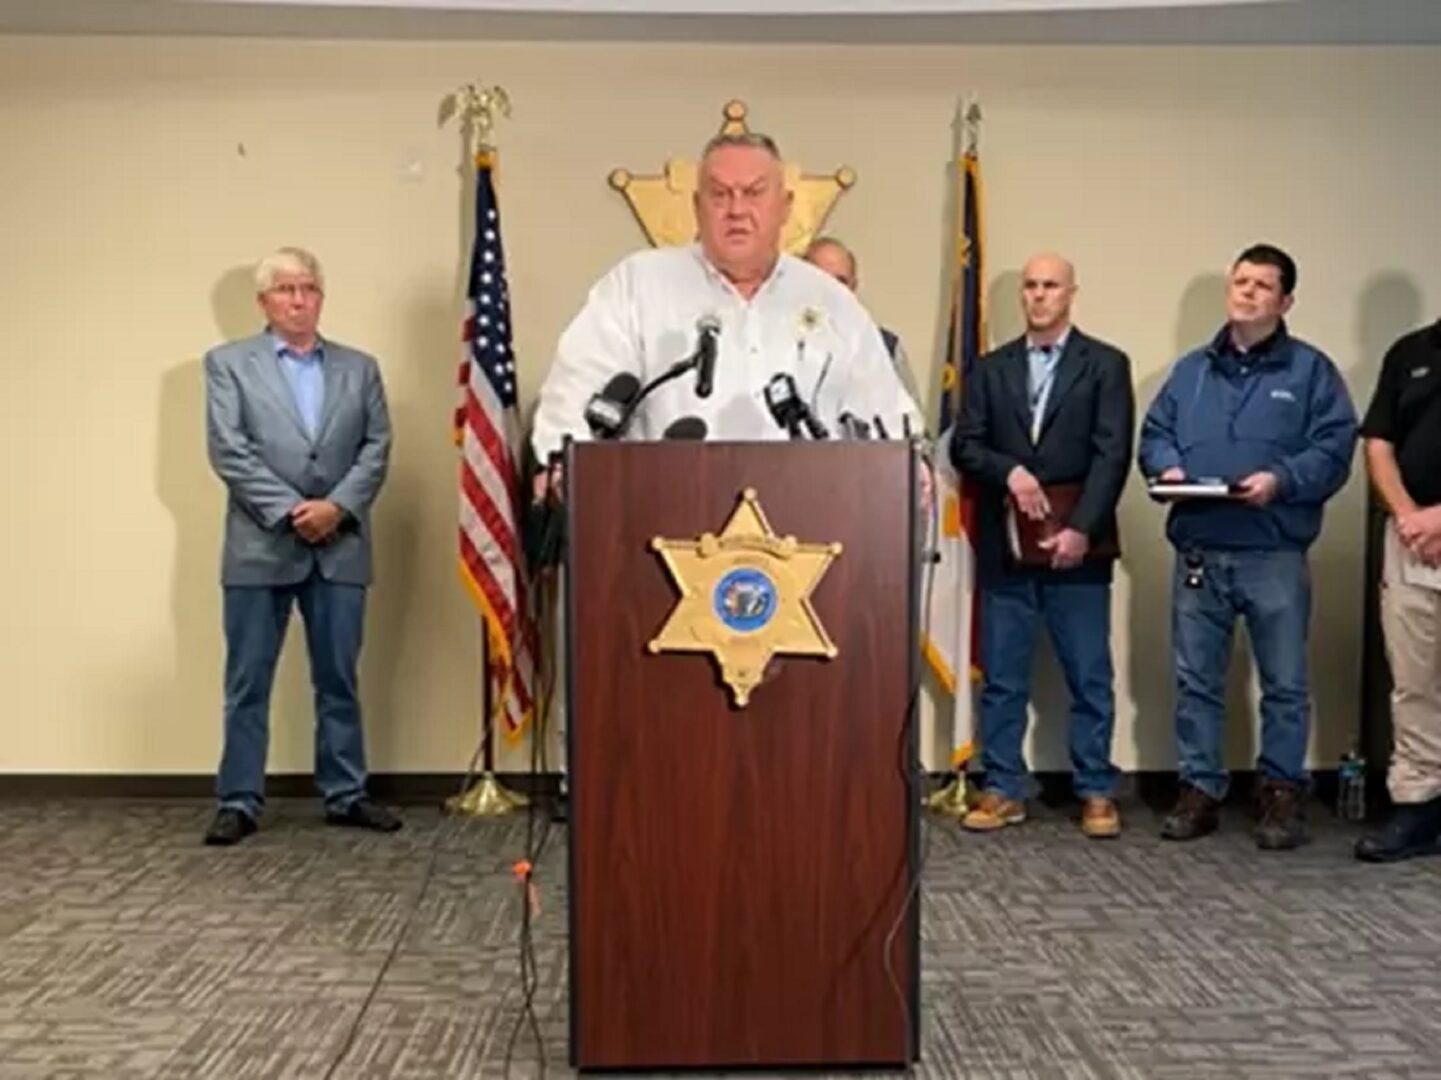 Moore County Sheriff Ronnie Fields announced a nighttime curfew for the county after gunfire damaged power substations.